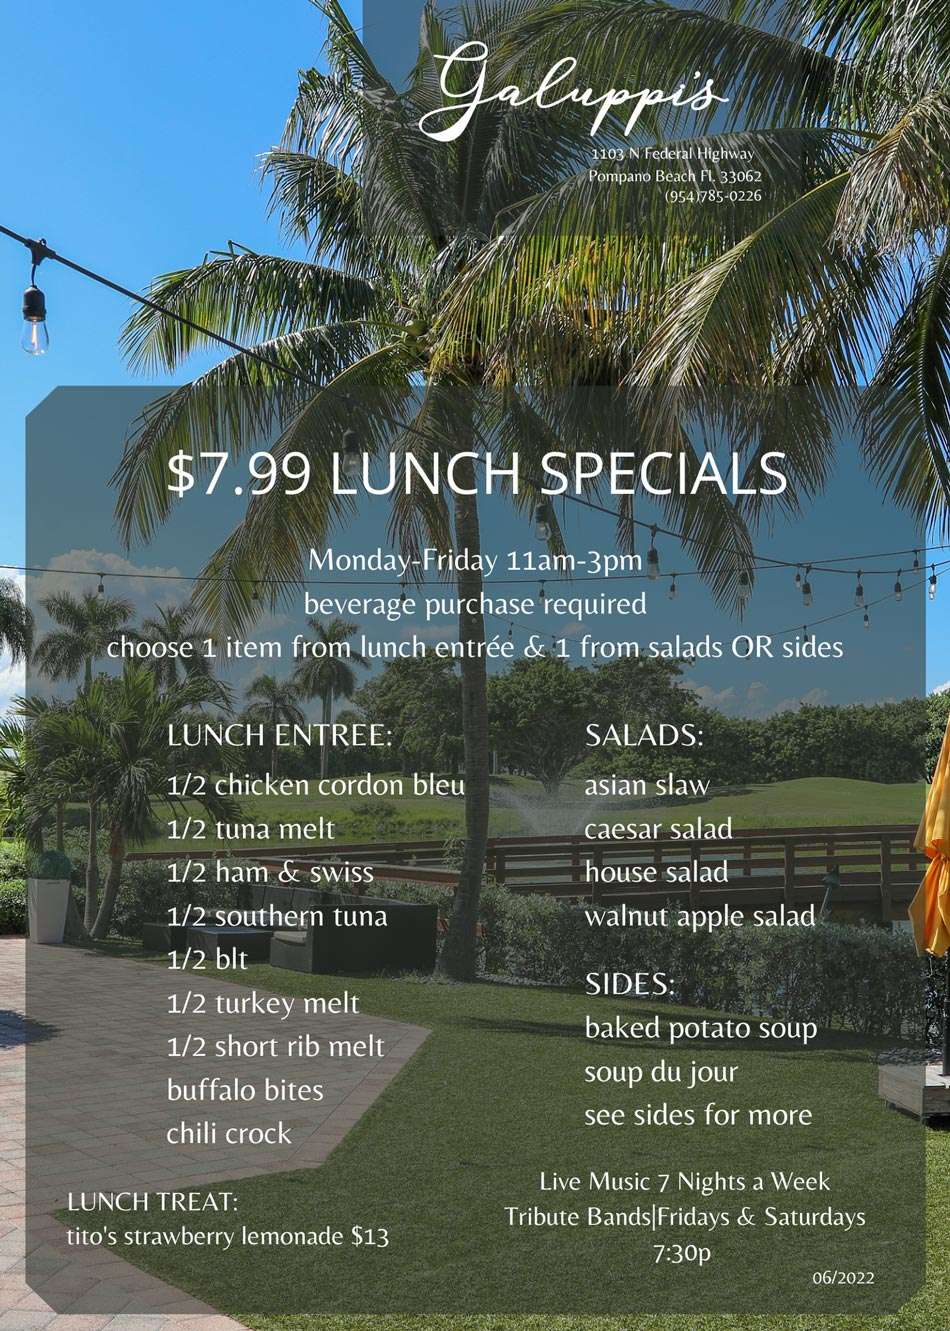 Galuppis Lunch Special